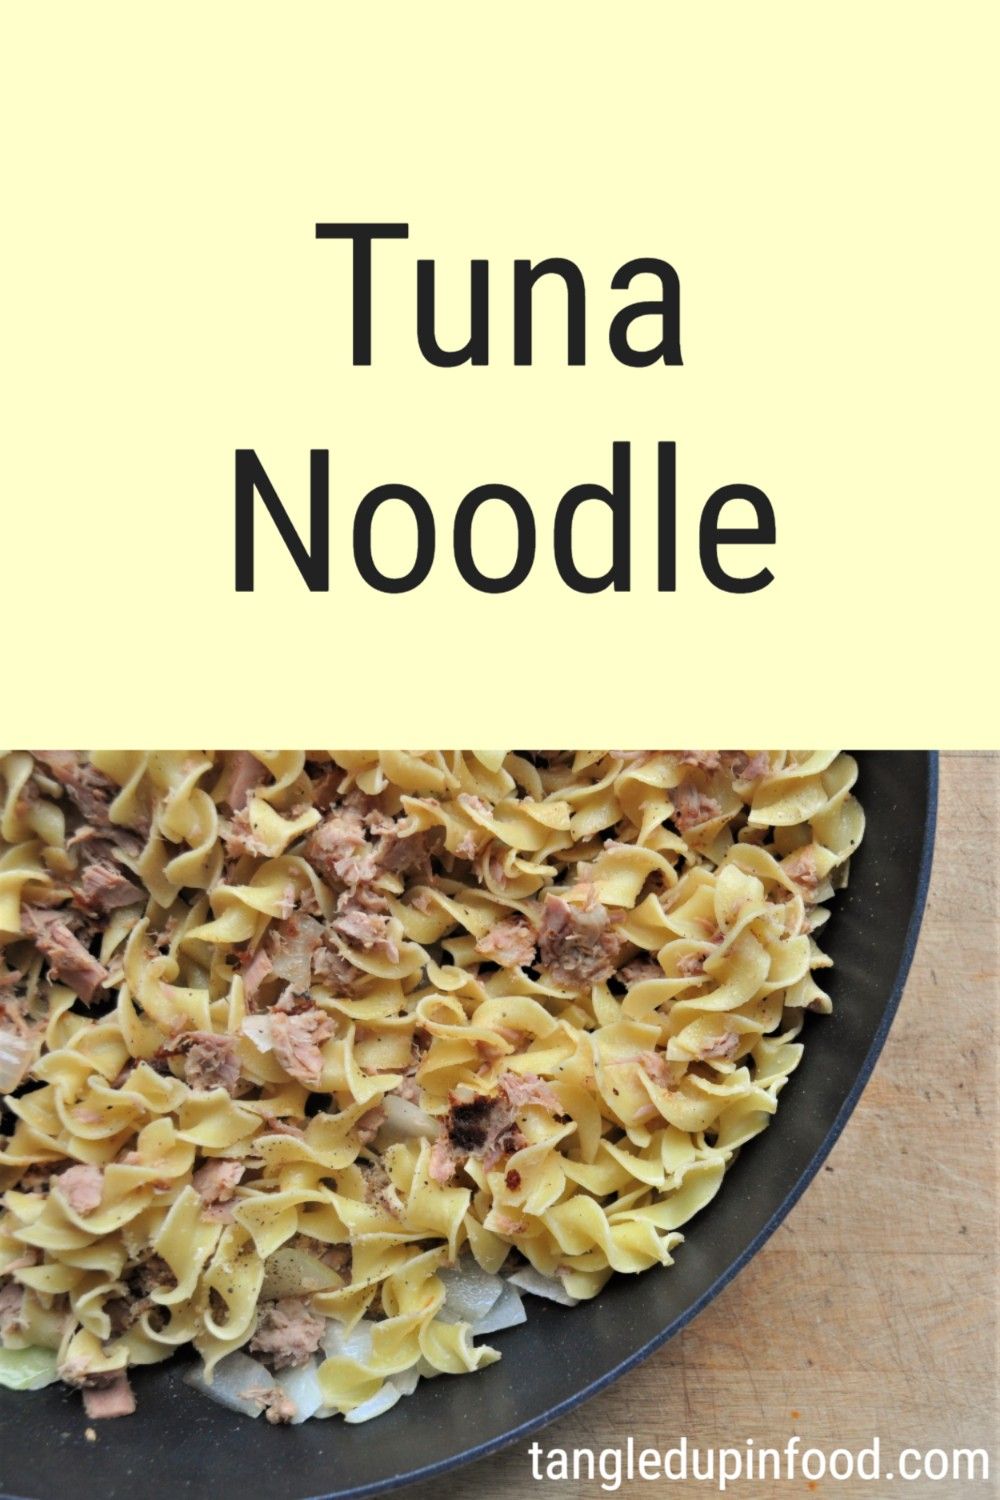 Egg noodles and tuna in skillet with text reading "Tuna Noodle"